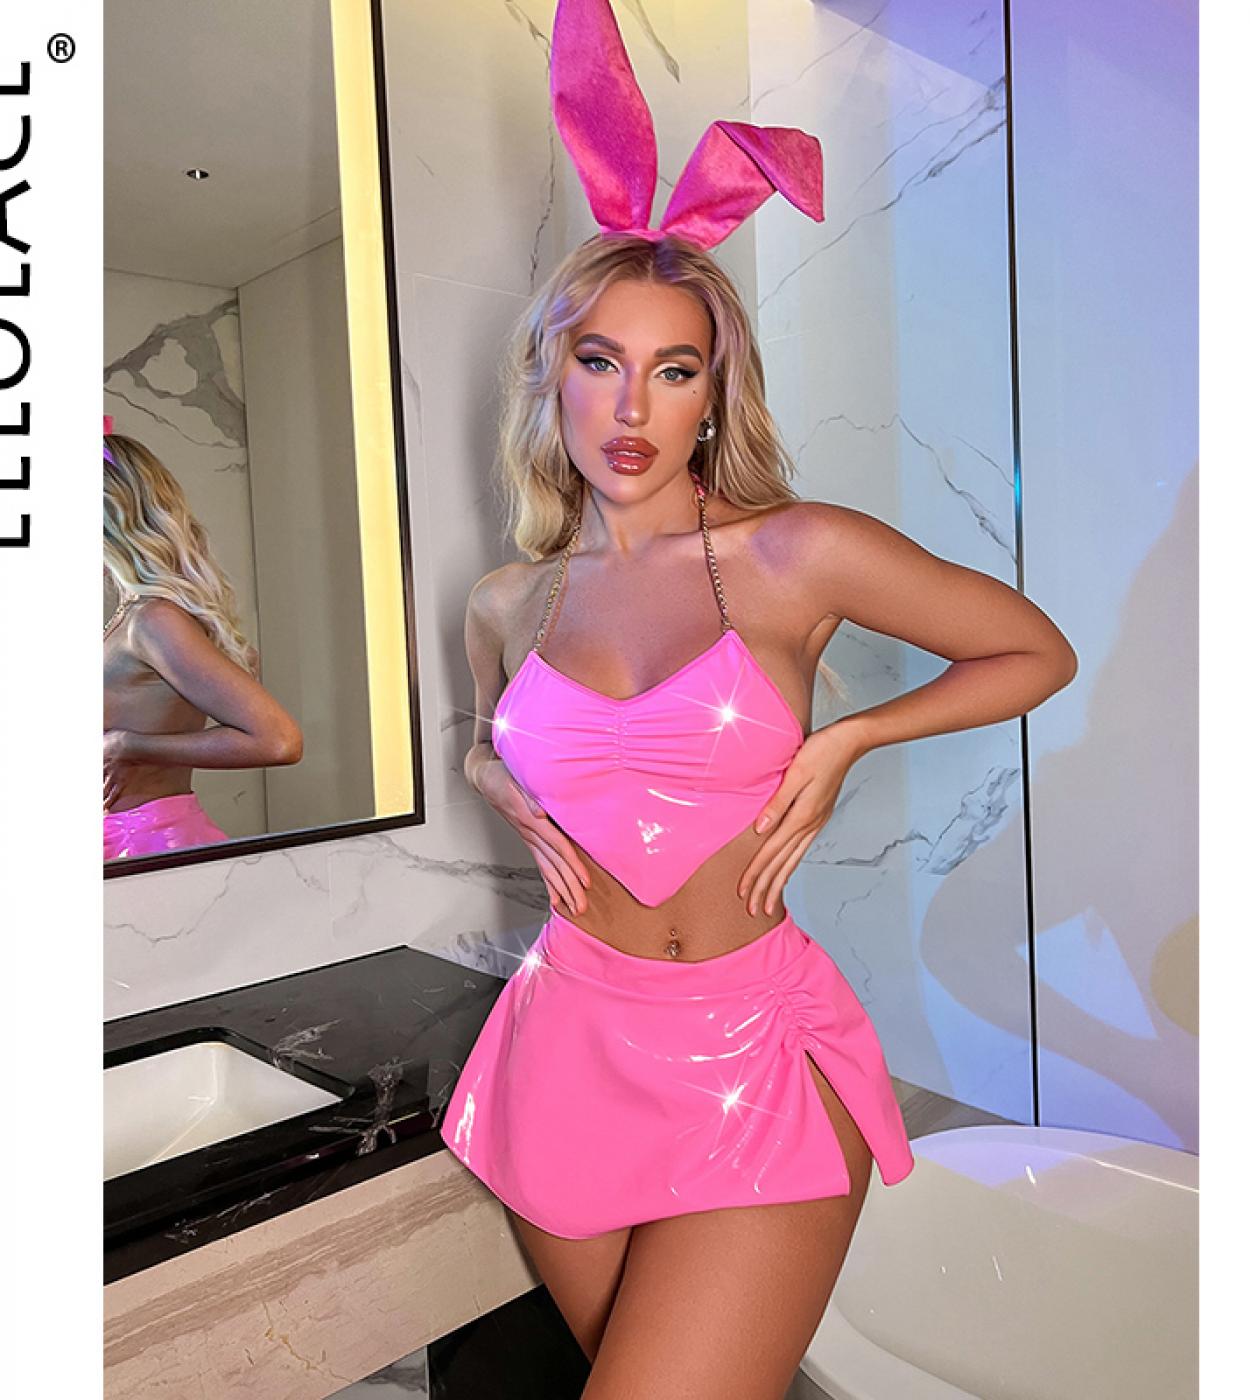 Ellolace Latex Lingerie Neon Pink Underwear Women 4piece Bunny  Pvc Naughty Outfit Nightclub Leather  Costumes  Exotic S